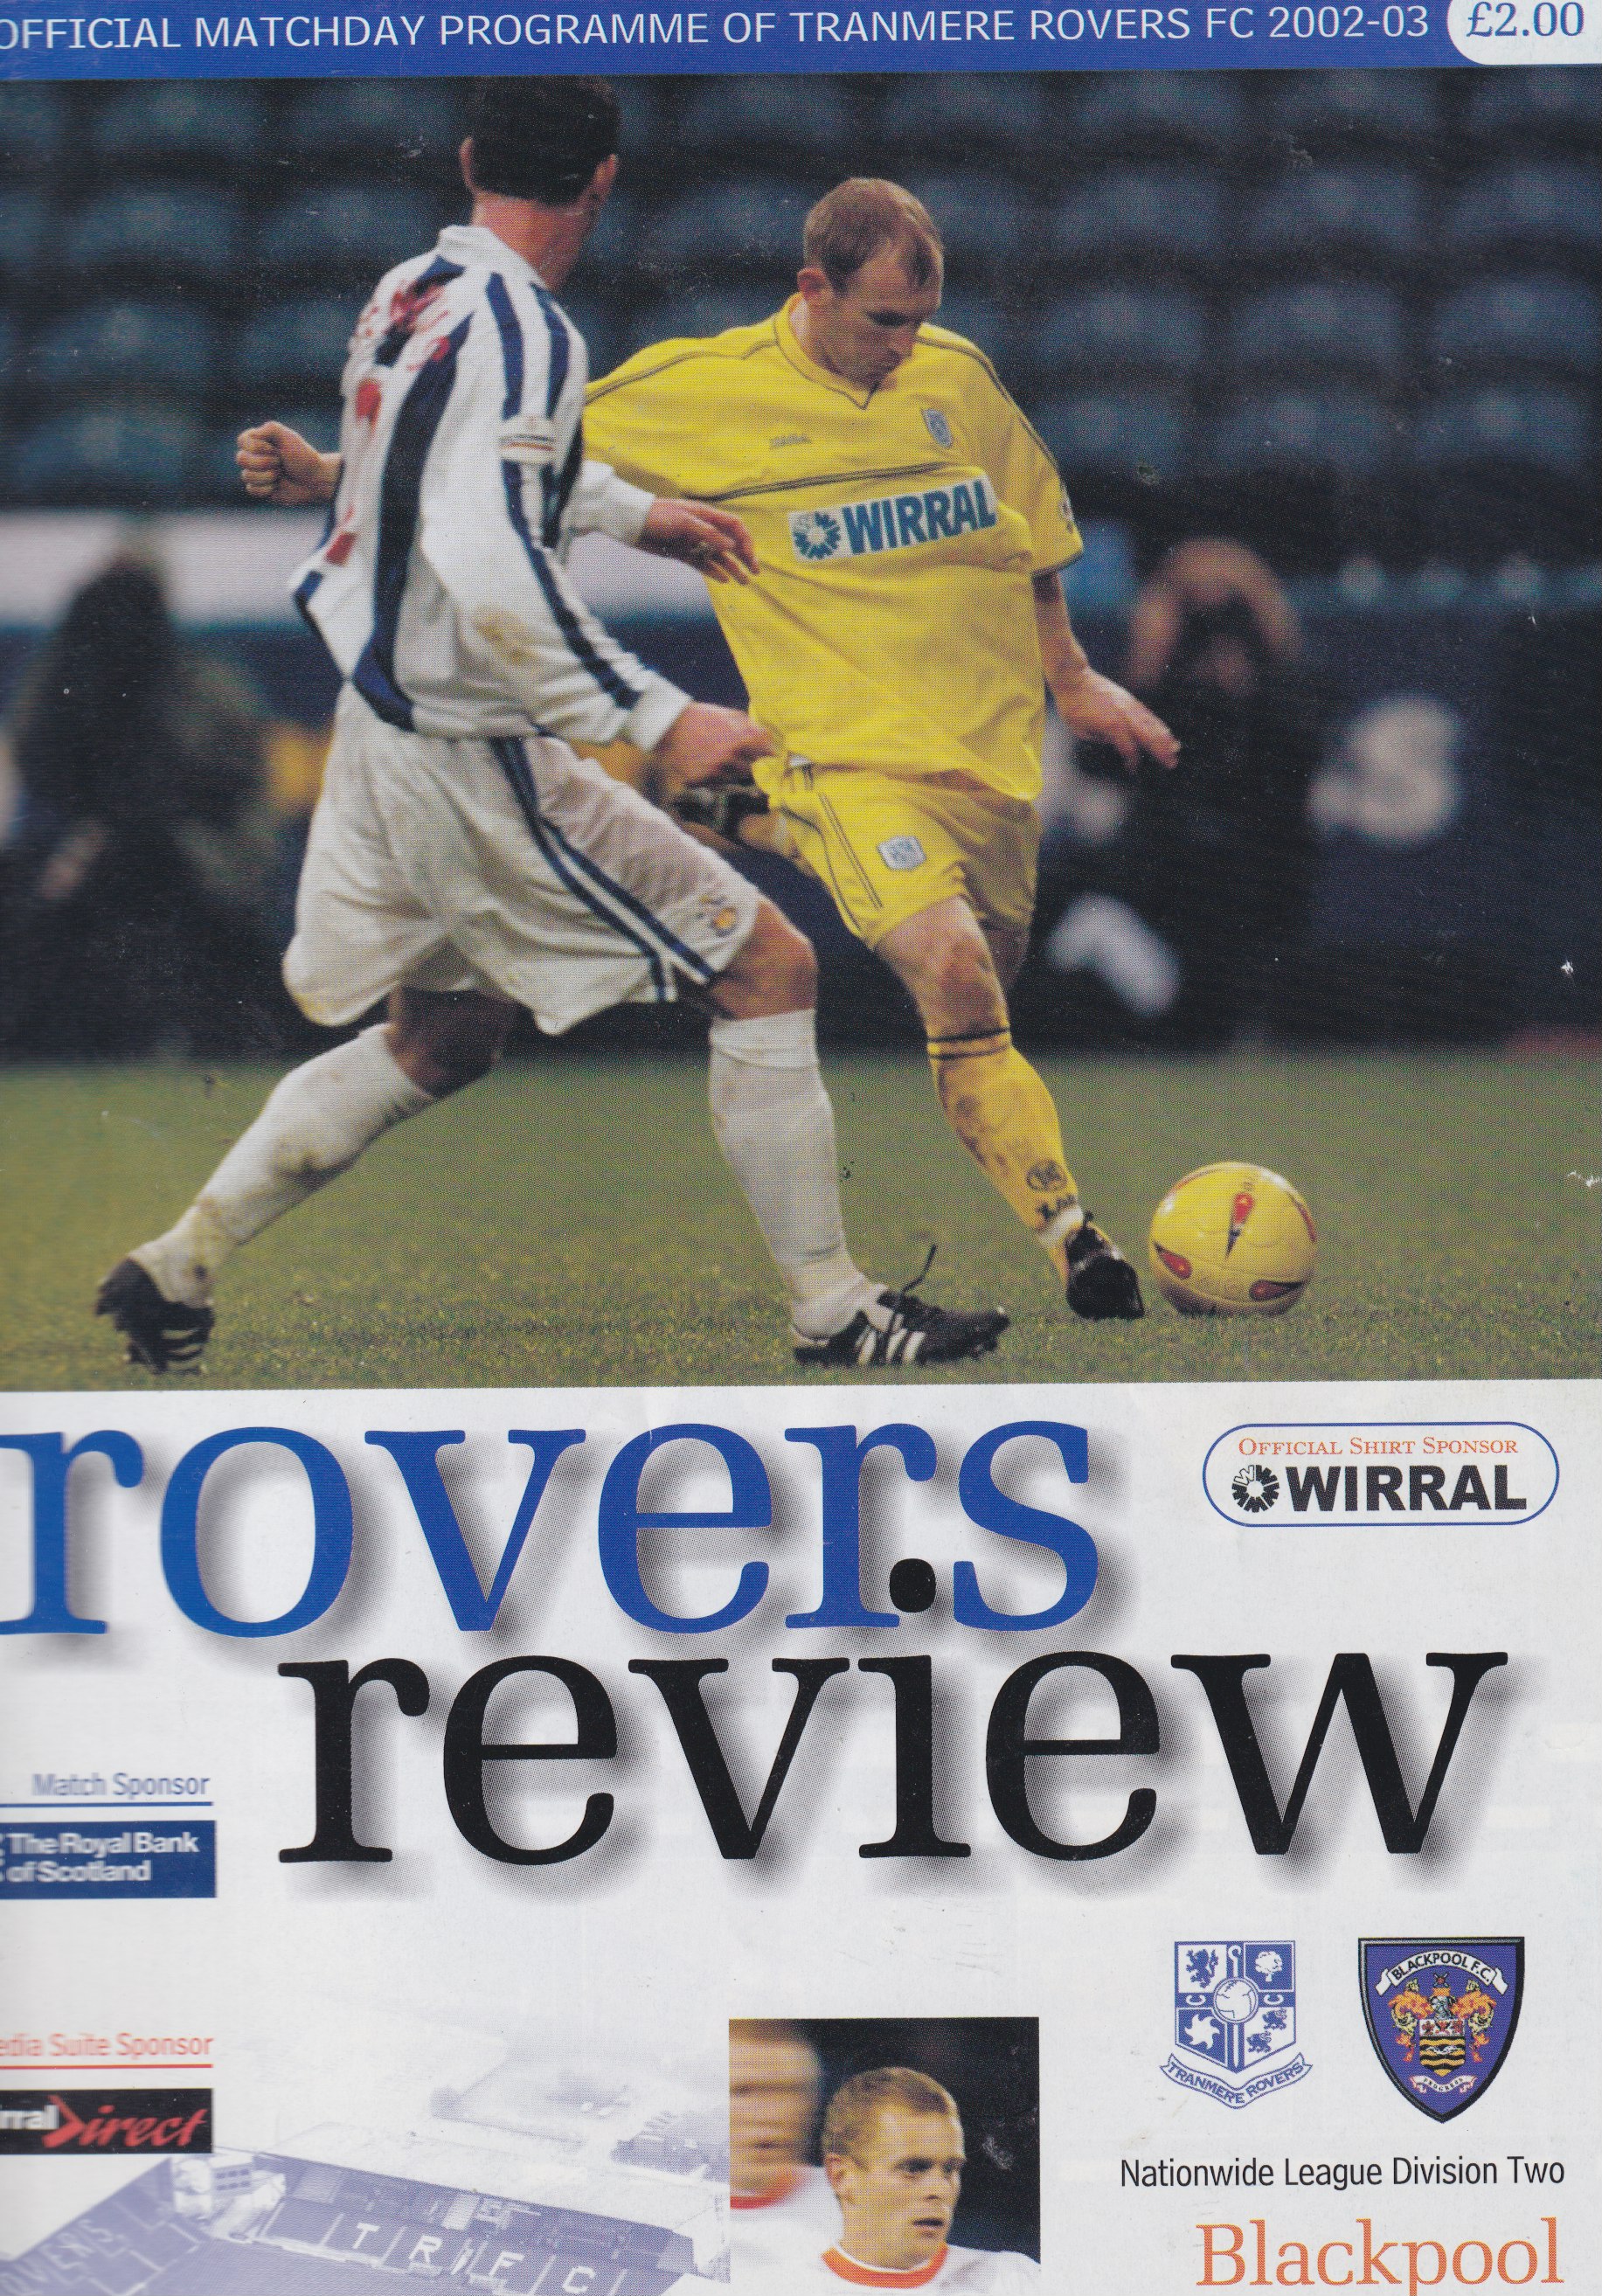 Match Programme For {home}} 2-1 Blackpool, League, 2003-02-22